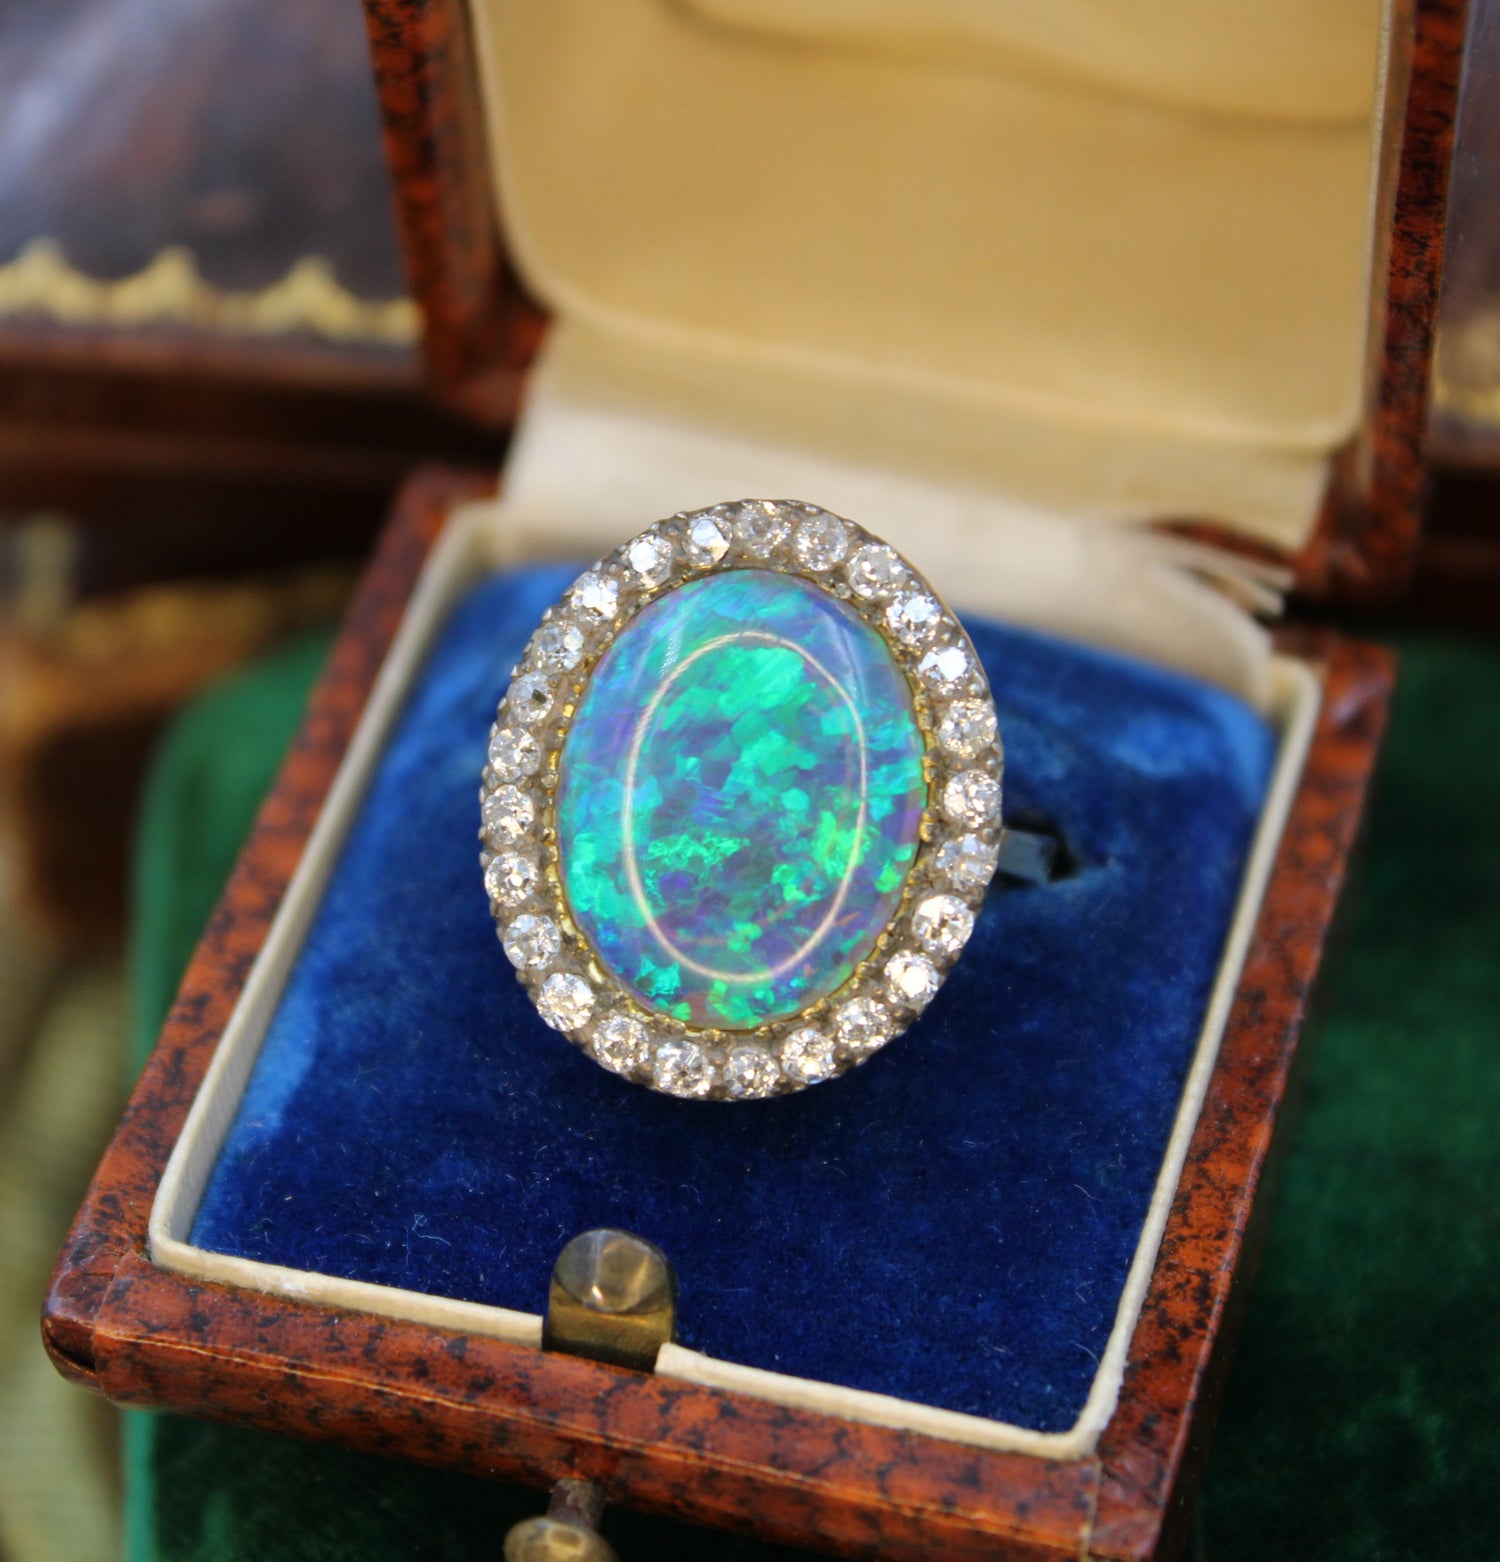 An Opal & DIamond Cluster Ring set in 14ct Yellow Gold & Silver, Continental, Circa 1905 - Robin Haydock Antiques